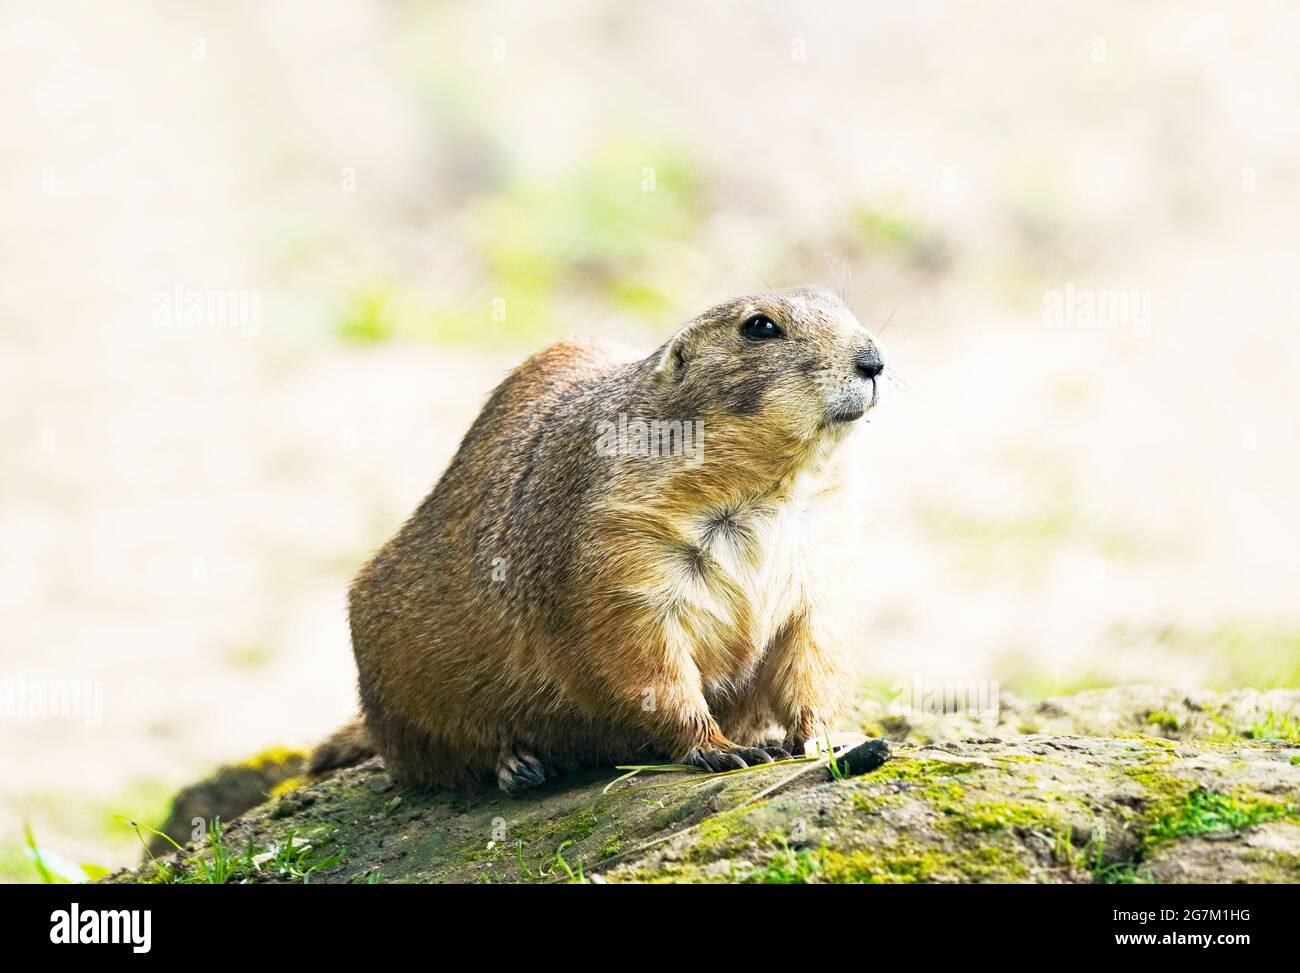 Watchful marmot on a small mound in a natural environment. Rodent close up. Marmota. Stock Photo